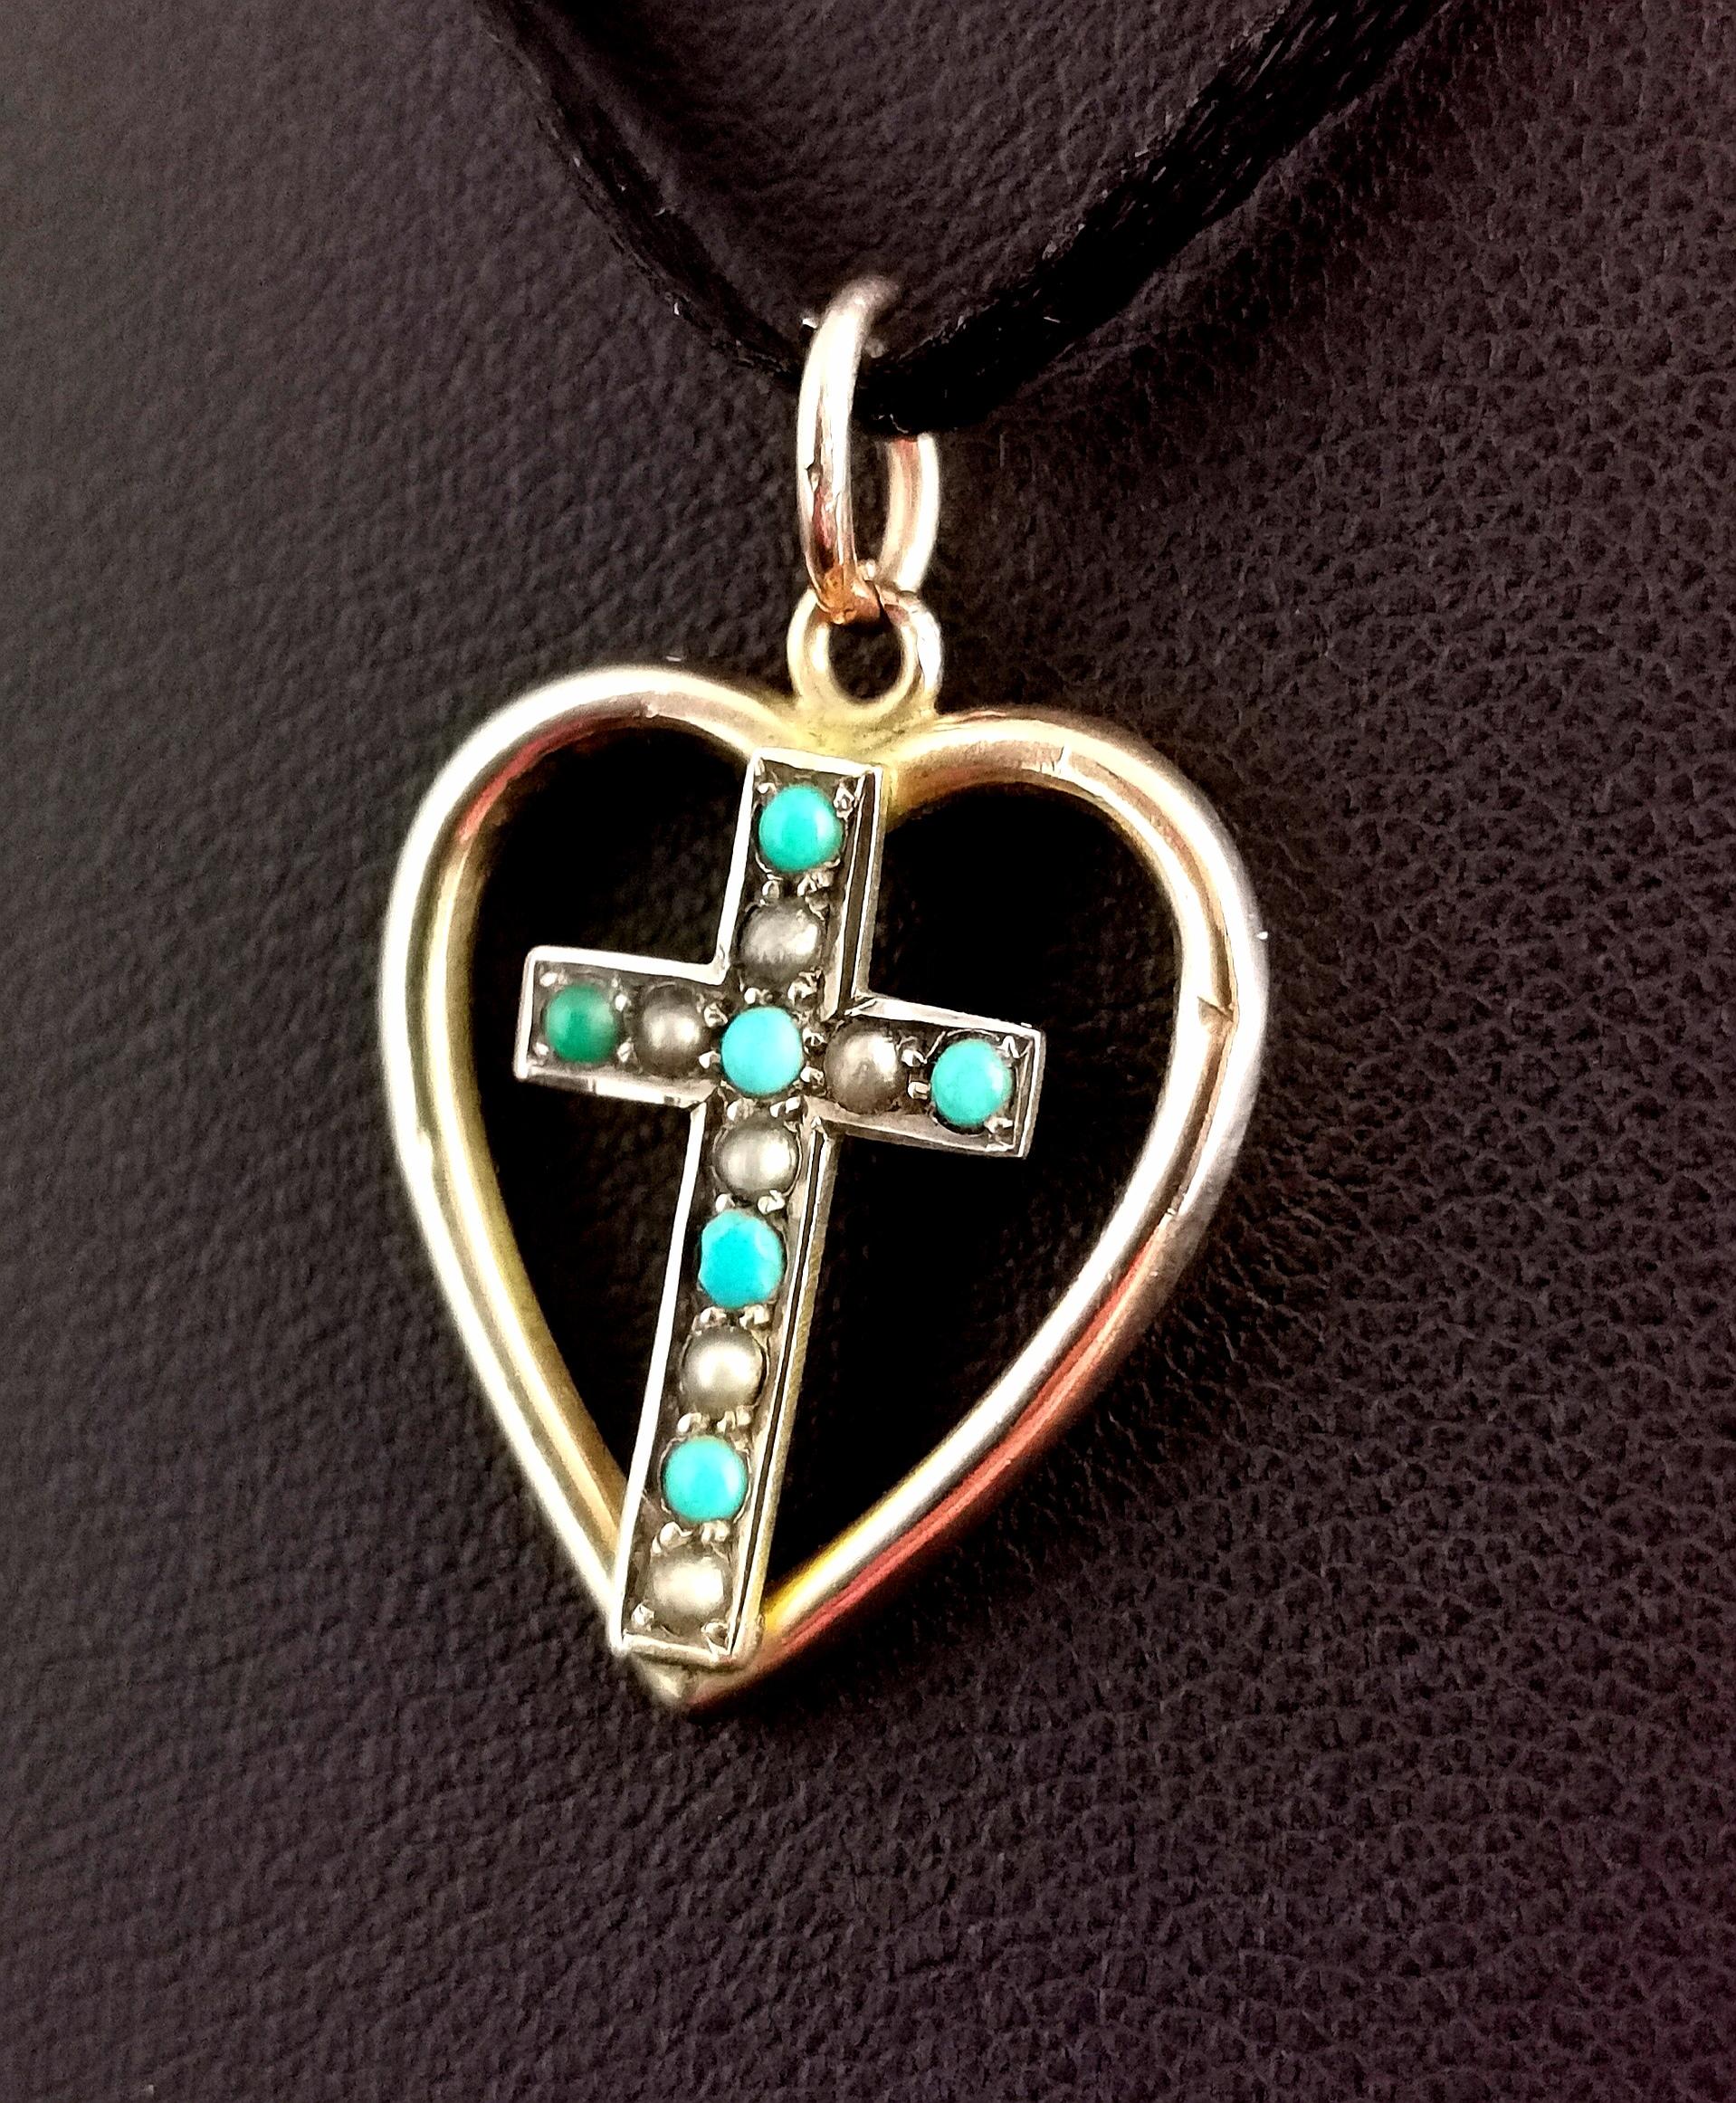 cross with heart in middle